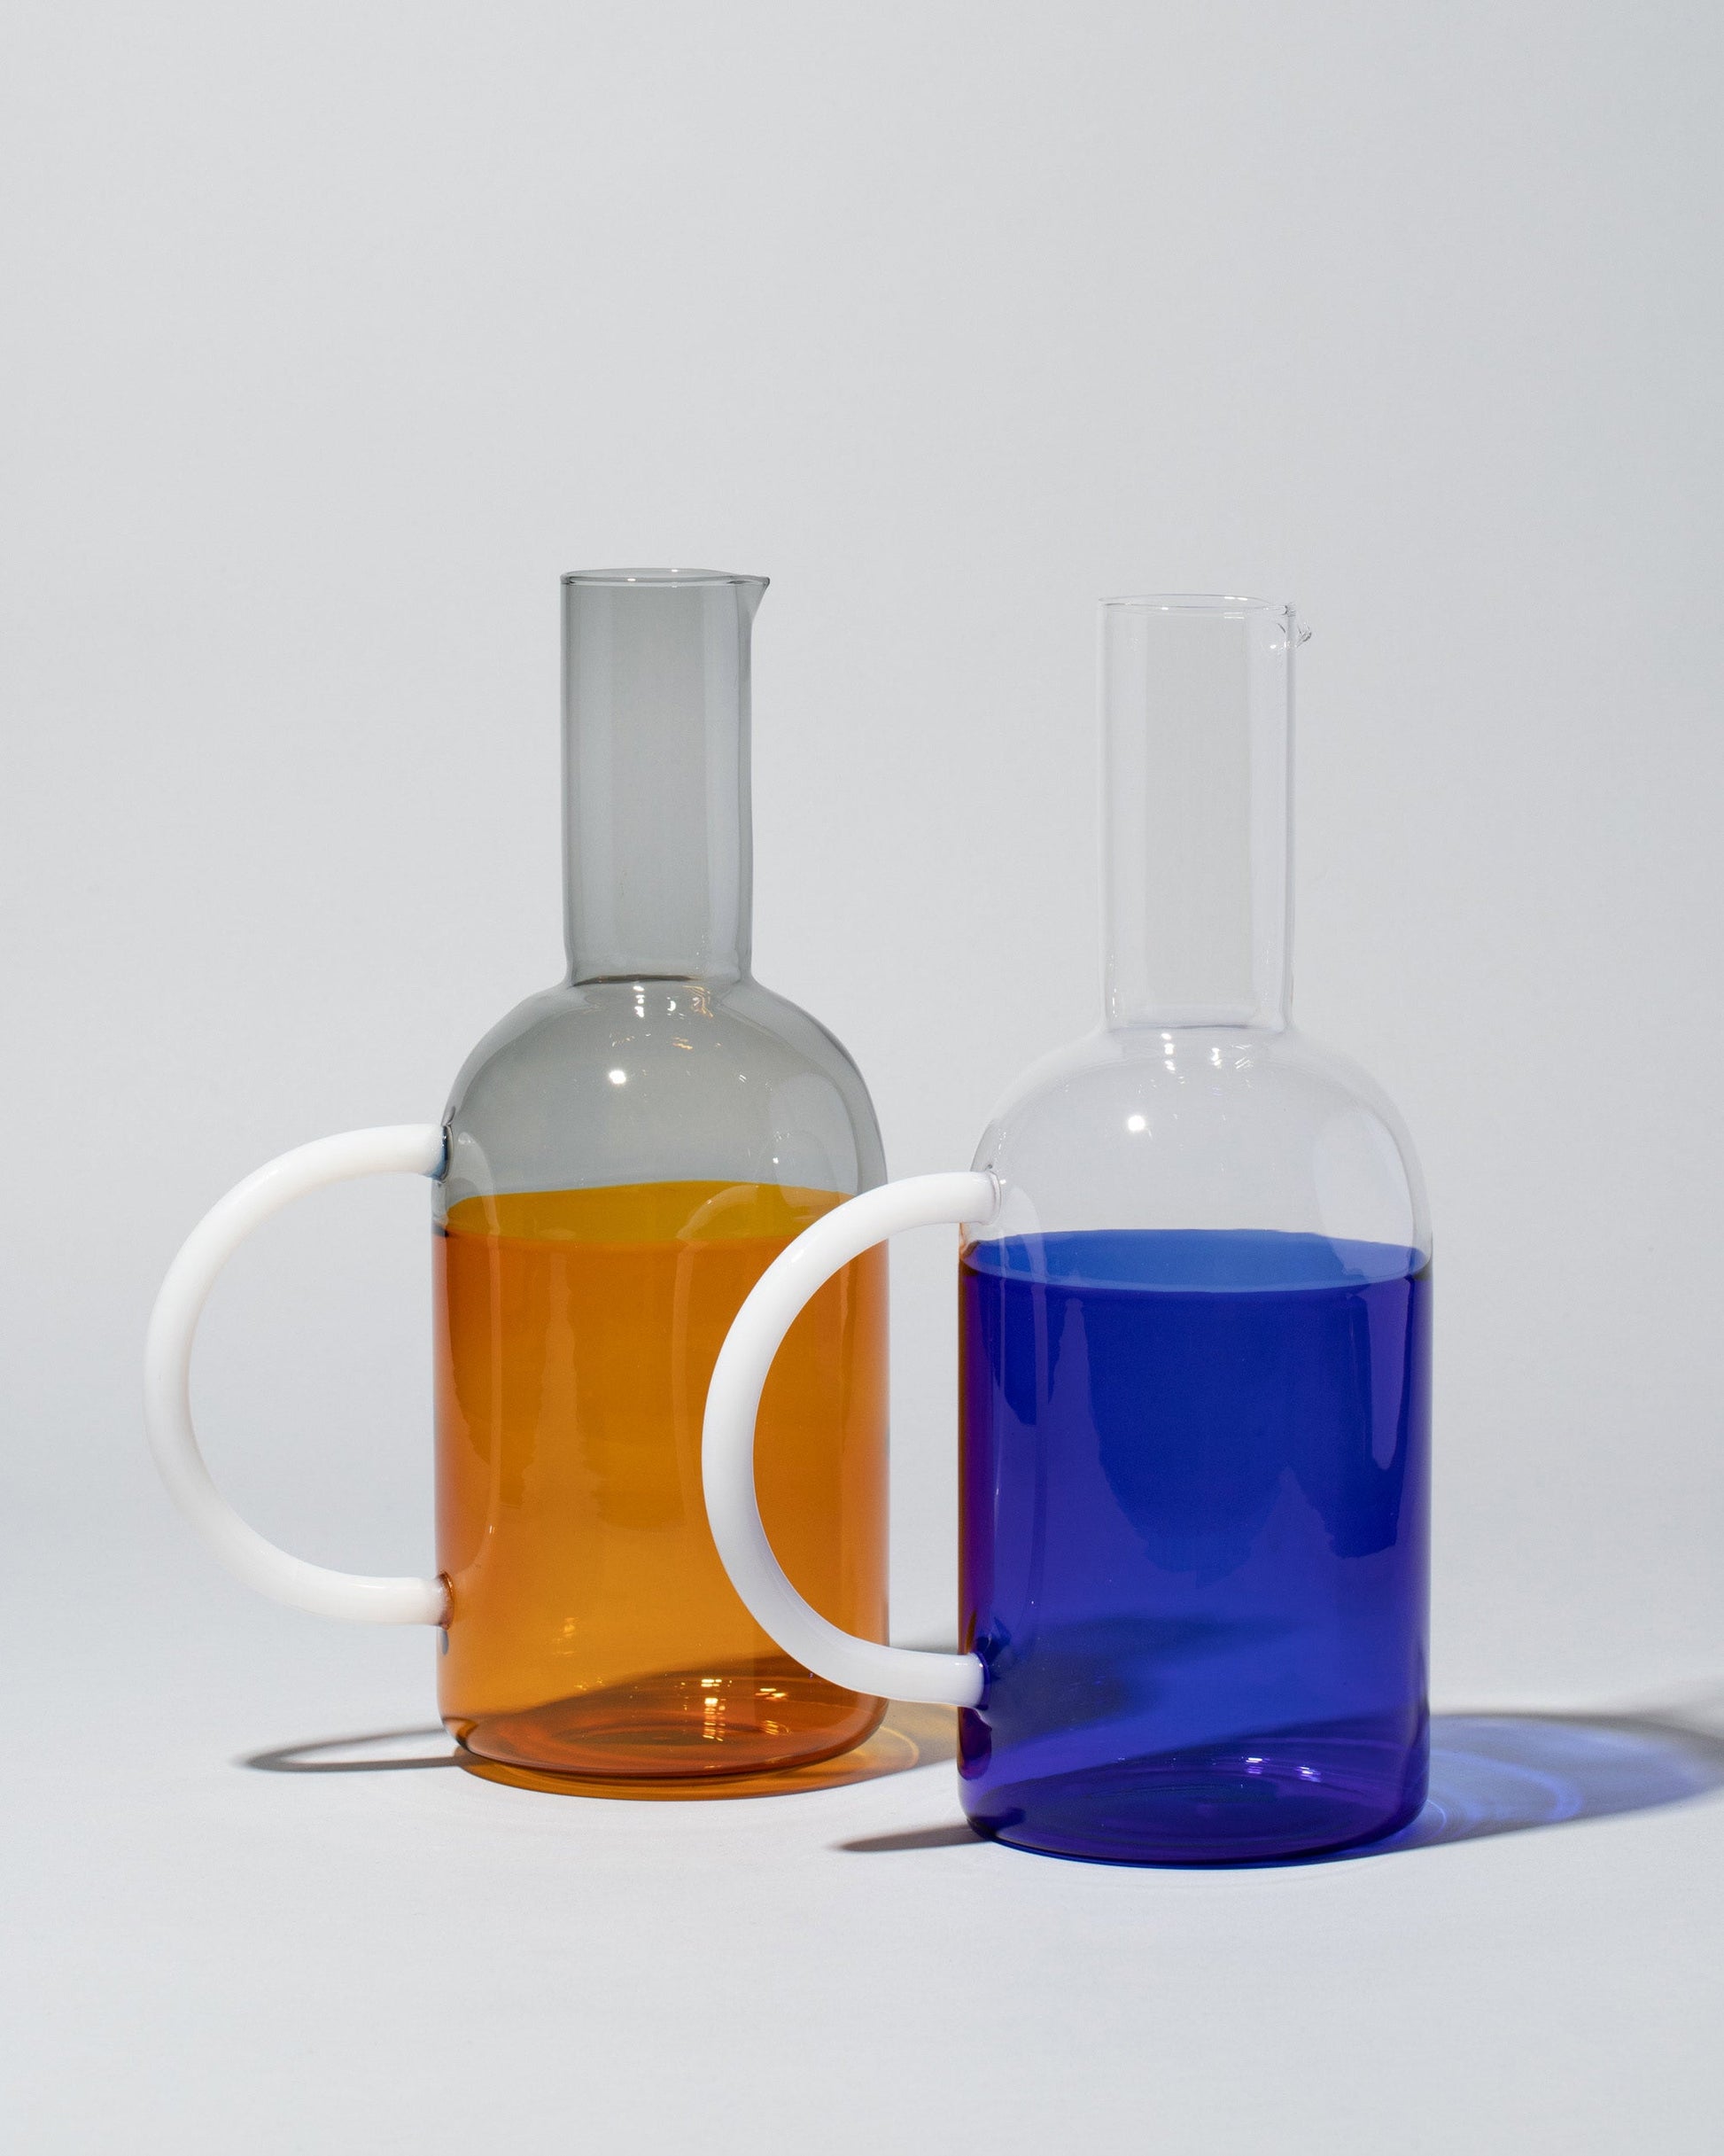 Group of Ichendorf Milano Amber/Smoke and Blue/Clear Tequila Sunrise Jugs on light color background.